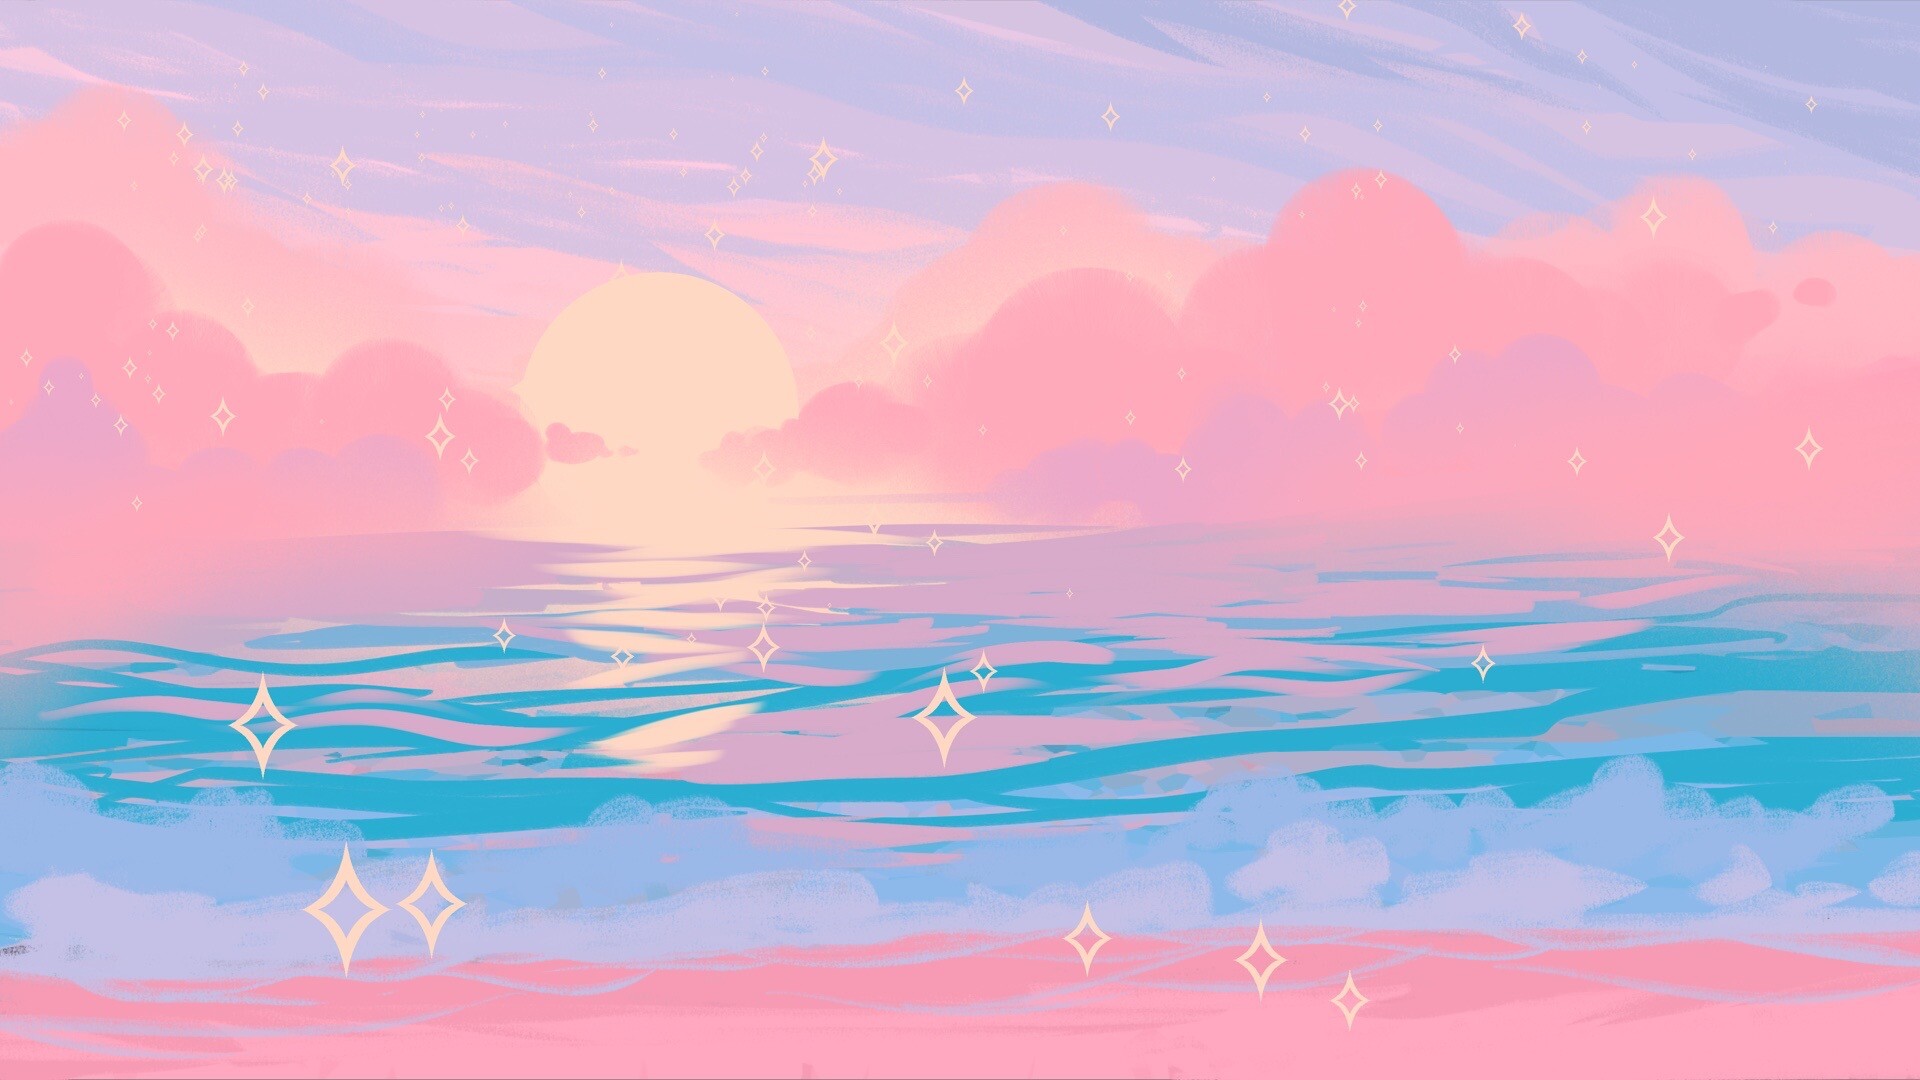 A digital art of a sun in between  the pink clouds, underneath the purple sky, above the blue sea and a beach.
There are sparkles everywhere 